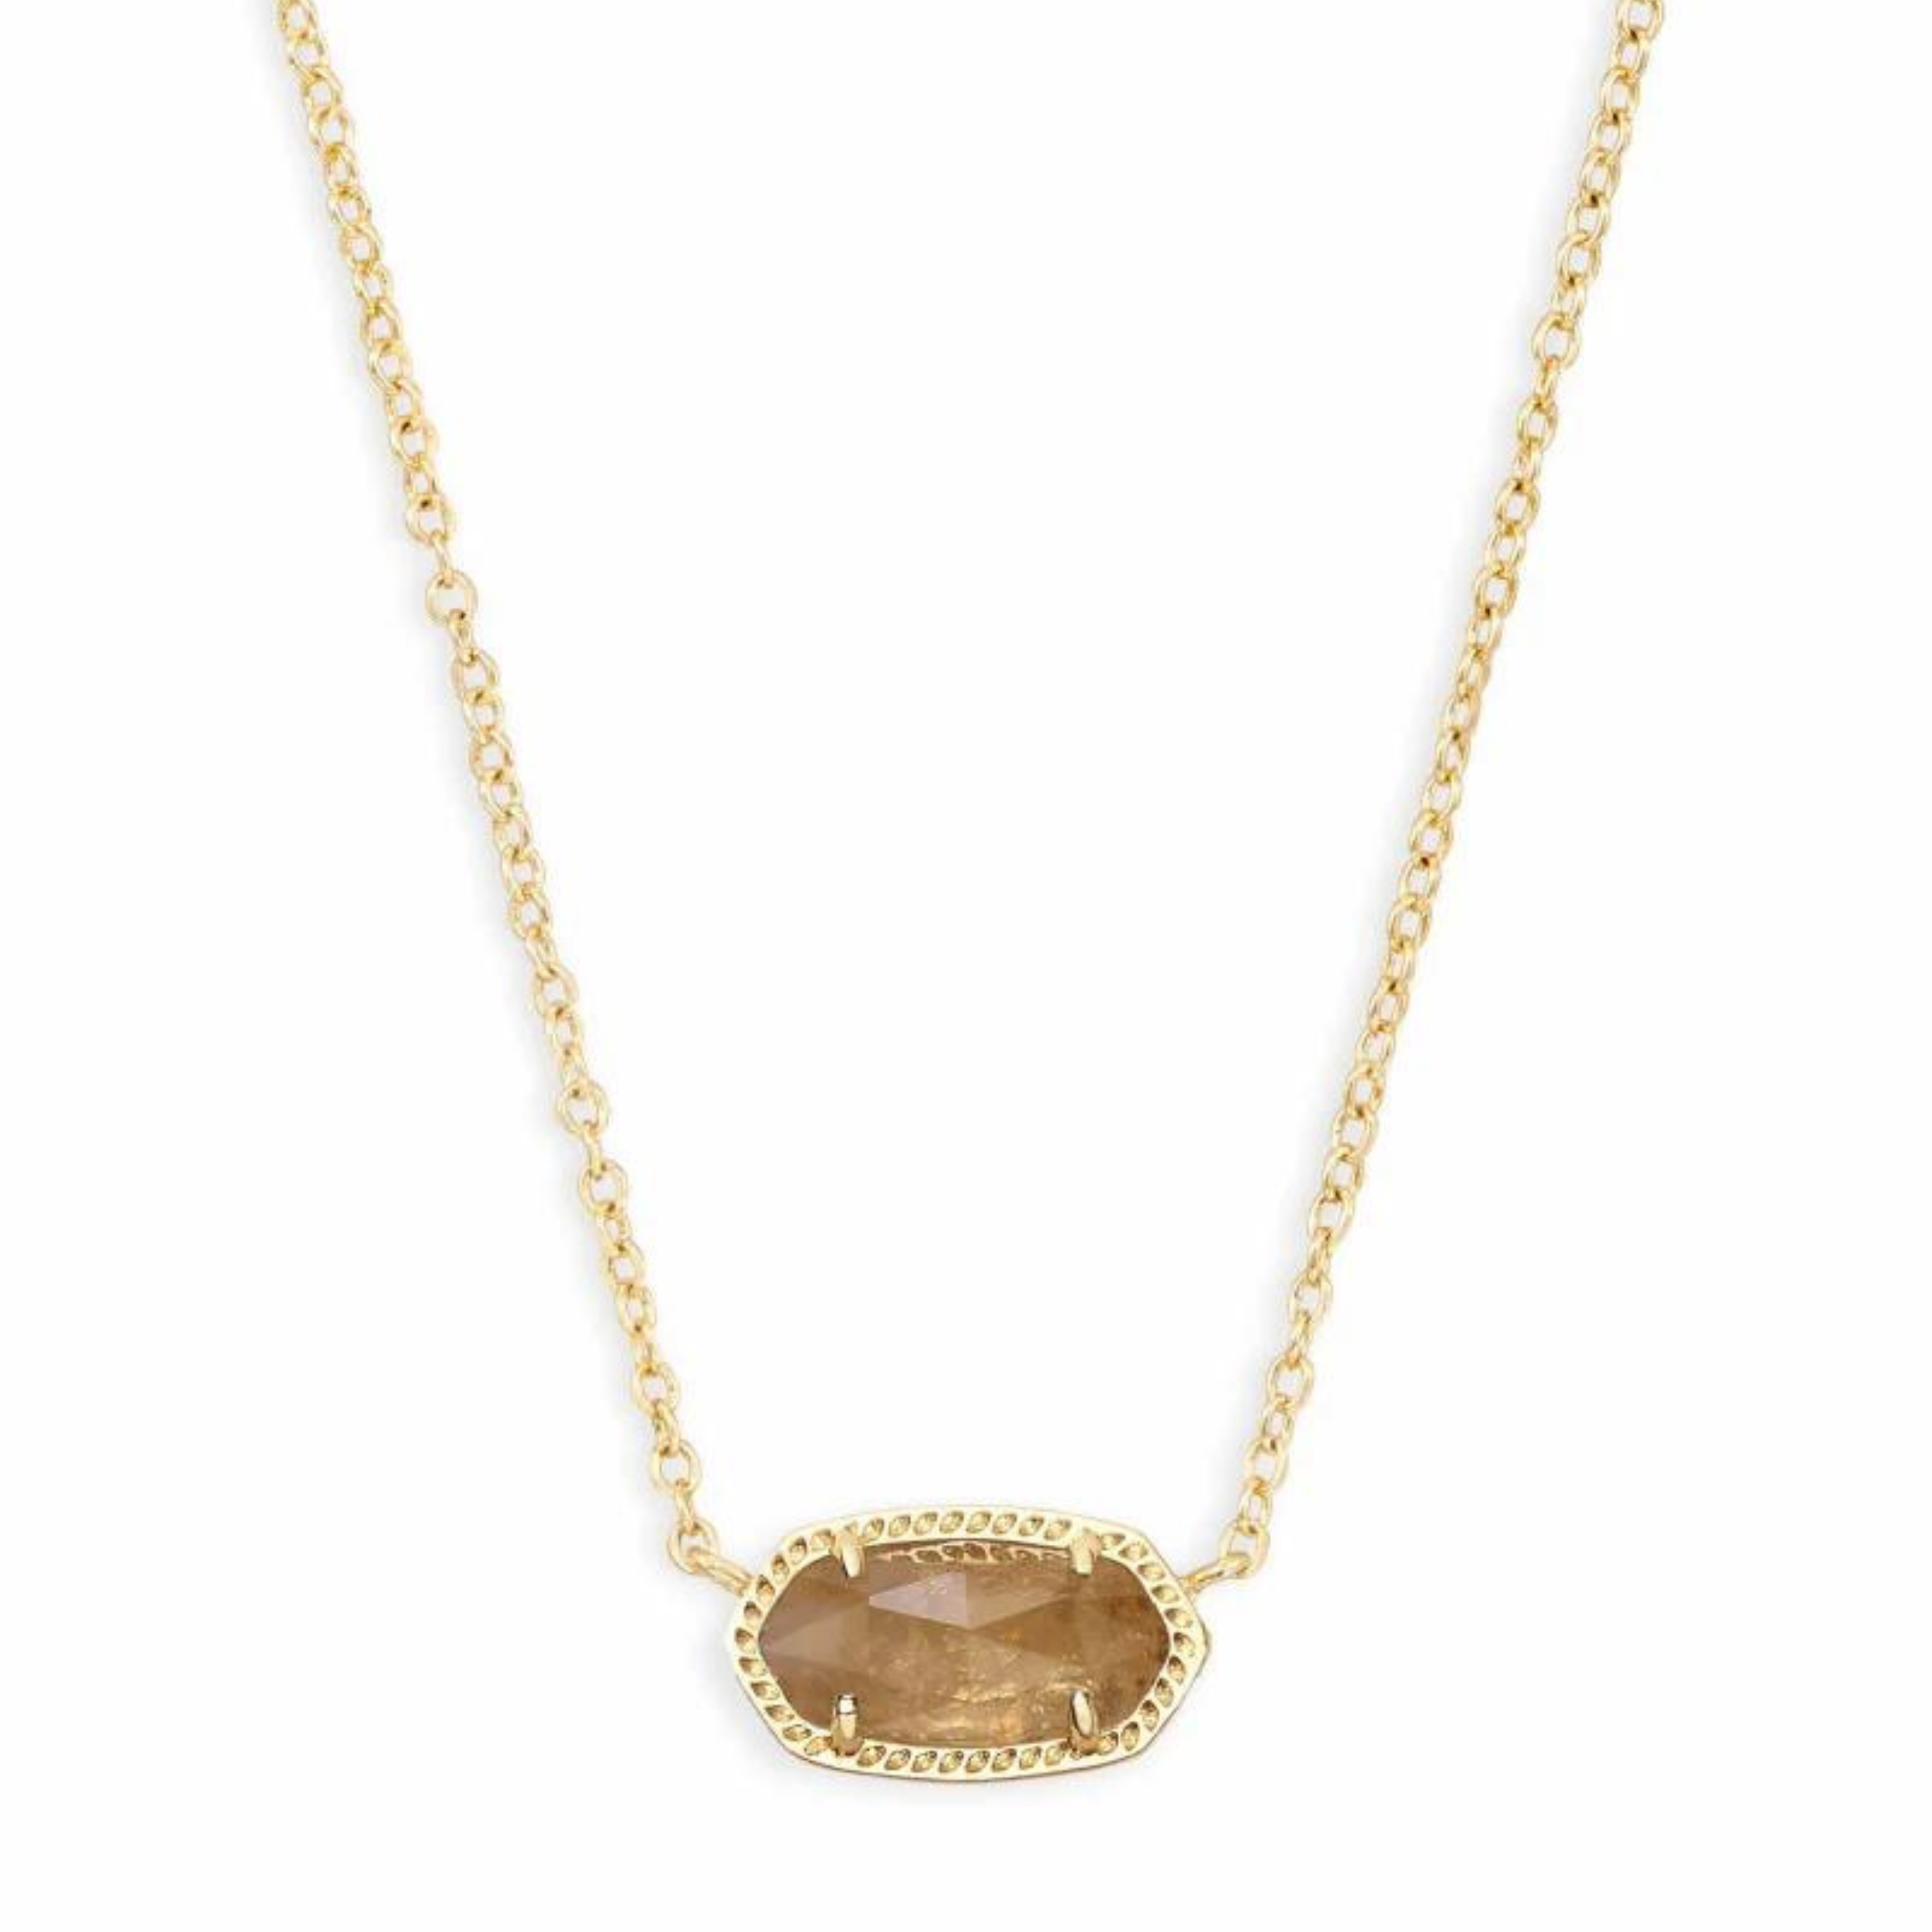 Gold necklace with a citrine quartz pendant, pictured on a white background.